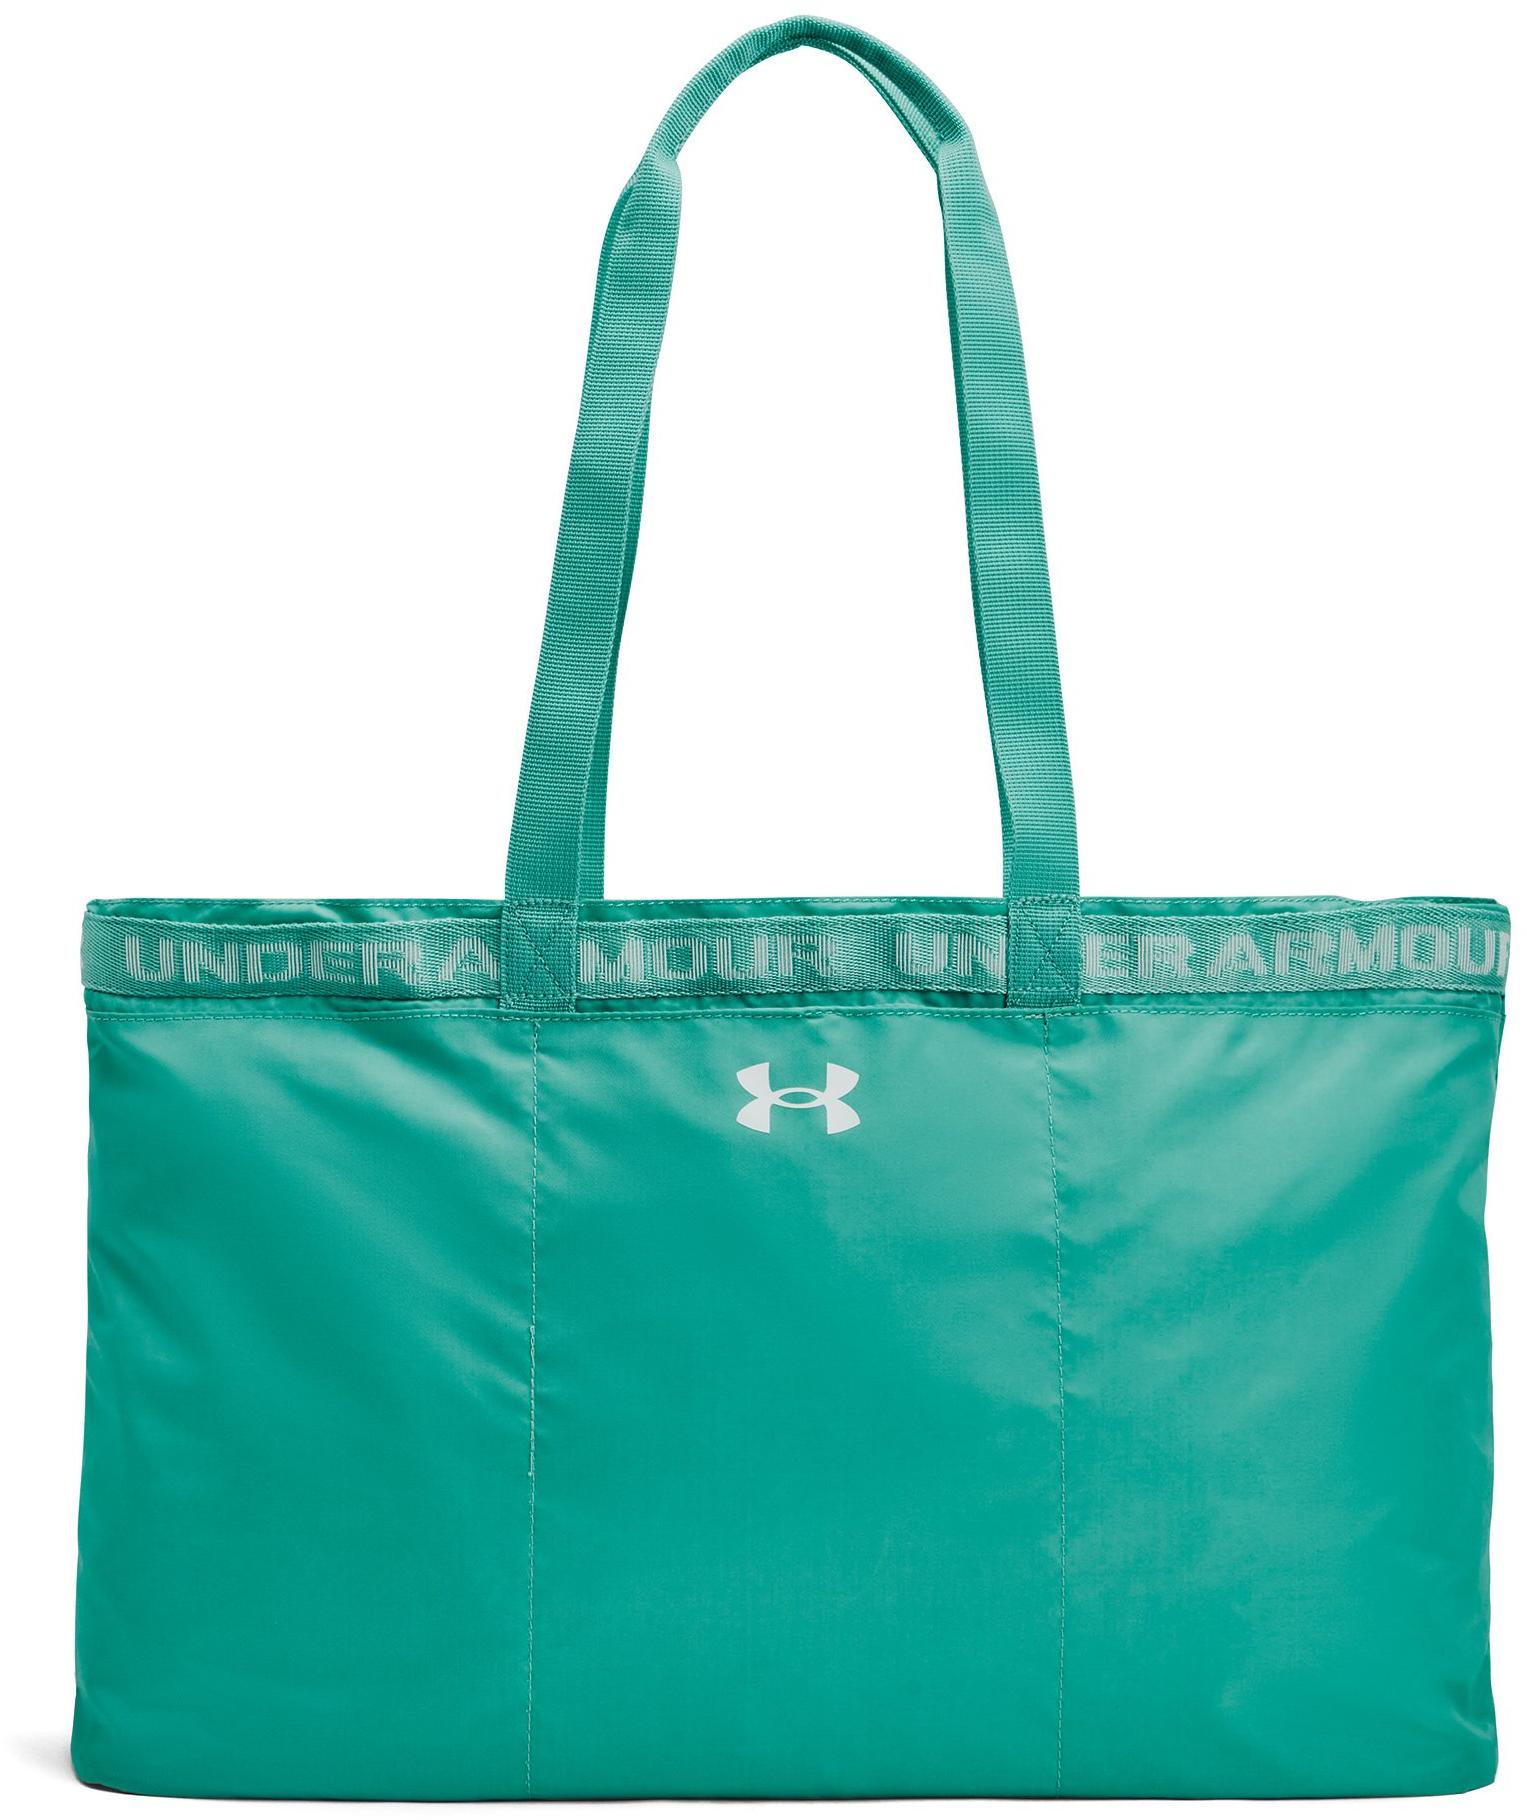 Under Armour Favorite Tote-GRN